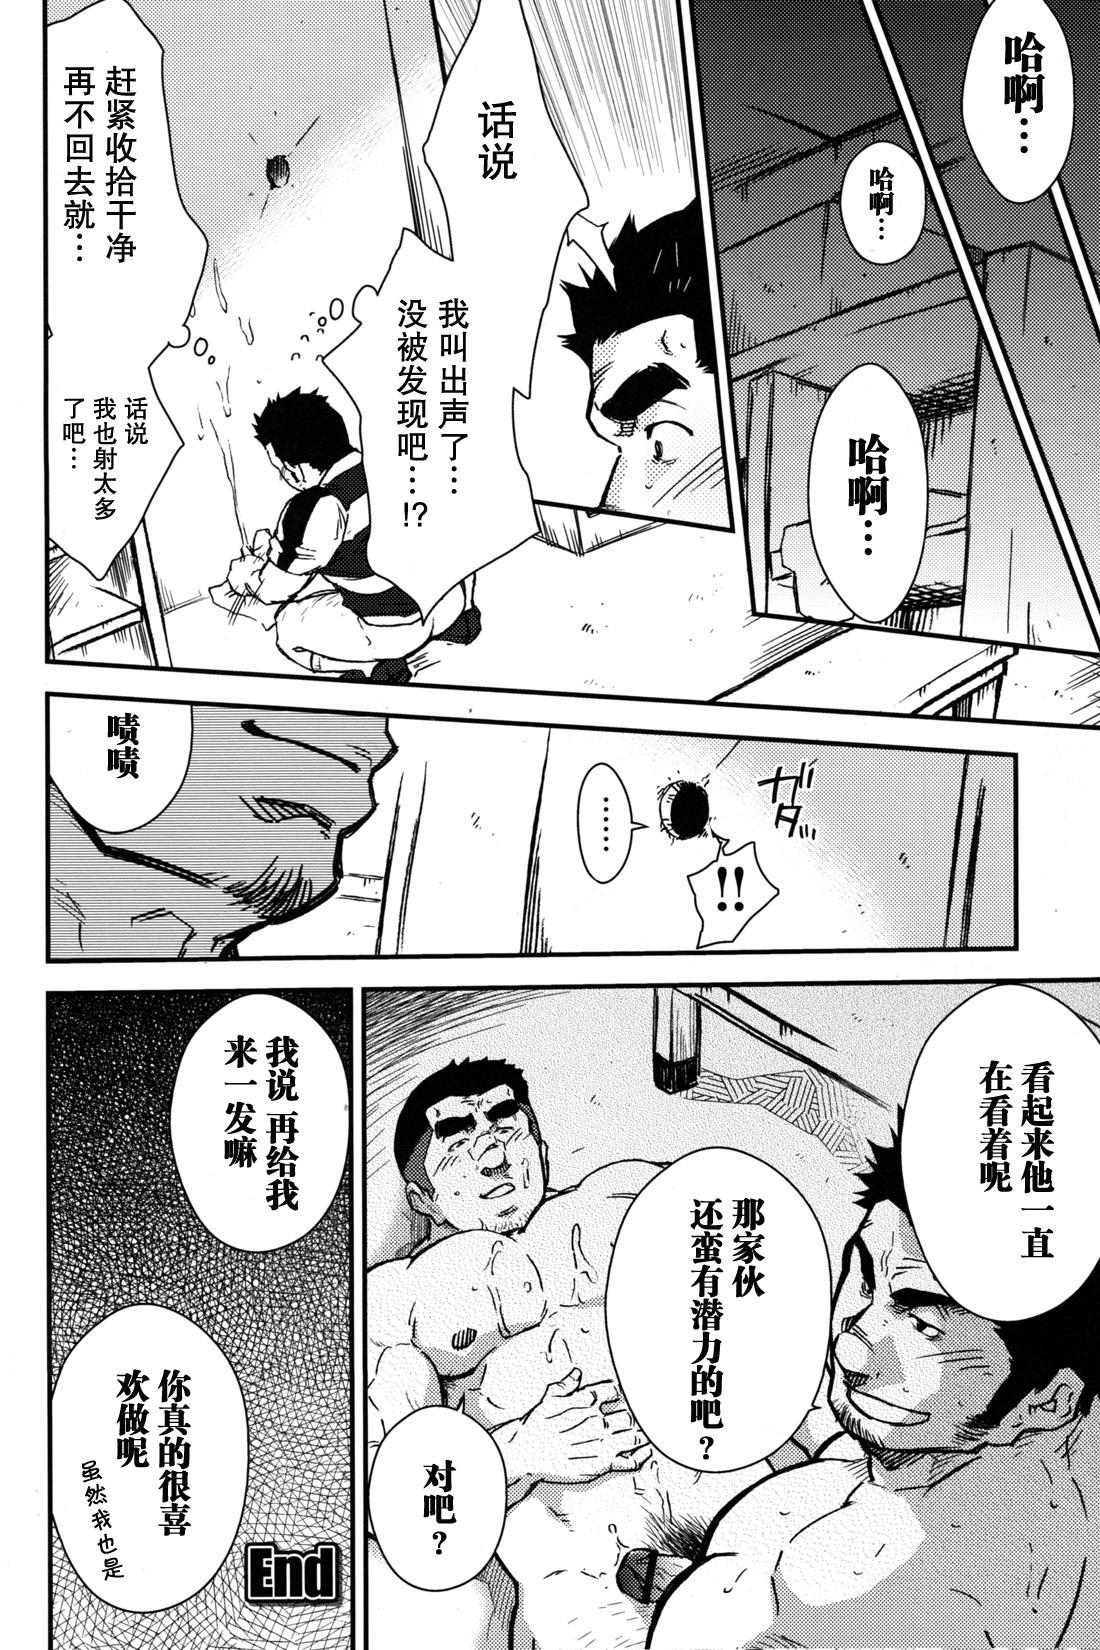 Fit 【黑夜汉化组】队长的局 Stripping - Page 8